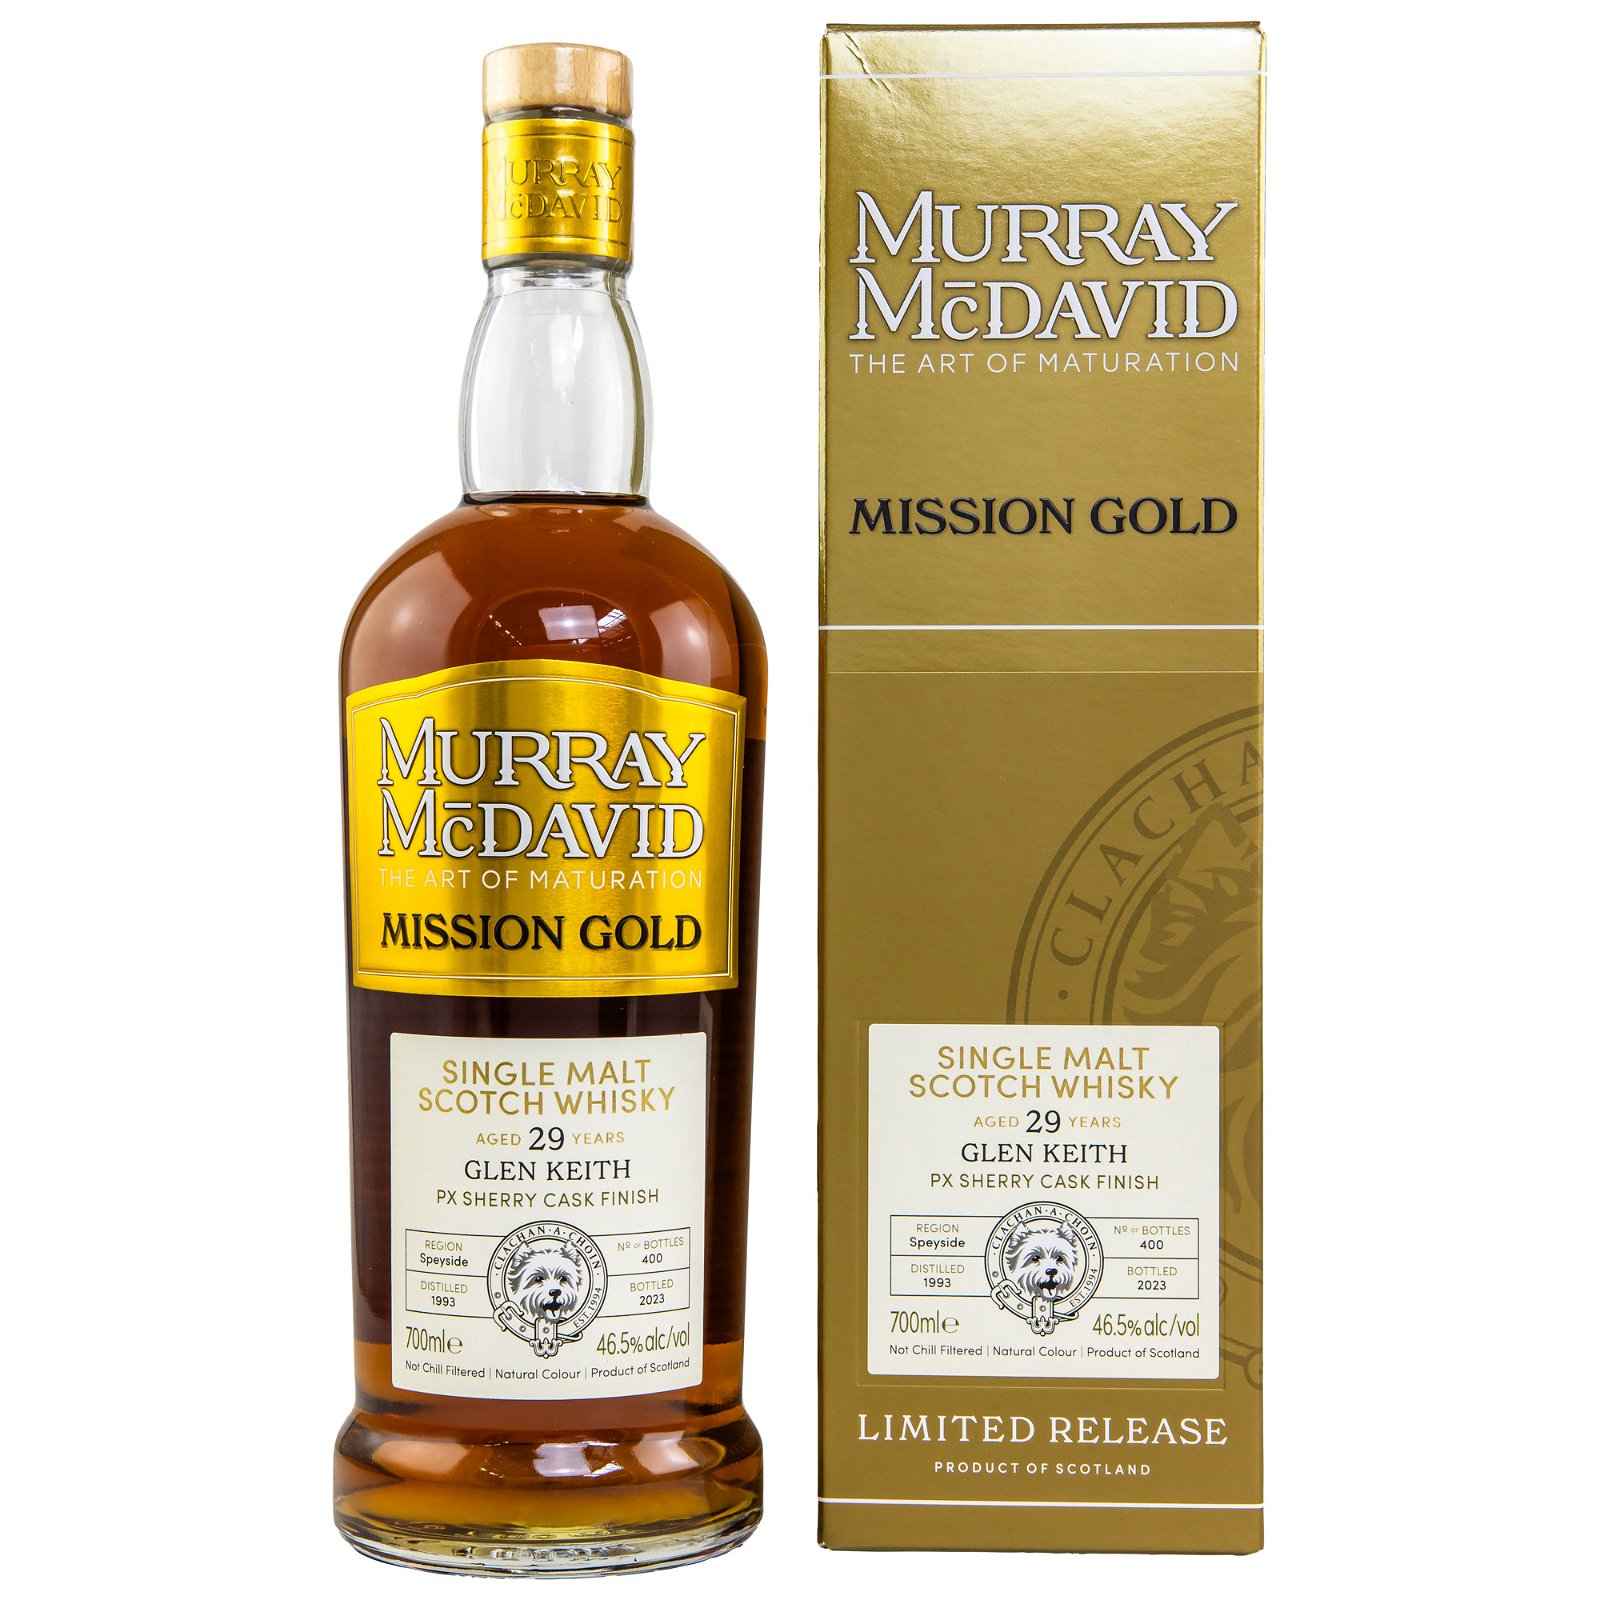 Glen Keith 1993/2023 - 29 Jahre PX Sherry Cask Finish Mission Gold (Murray McDavid)